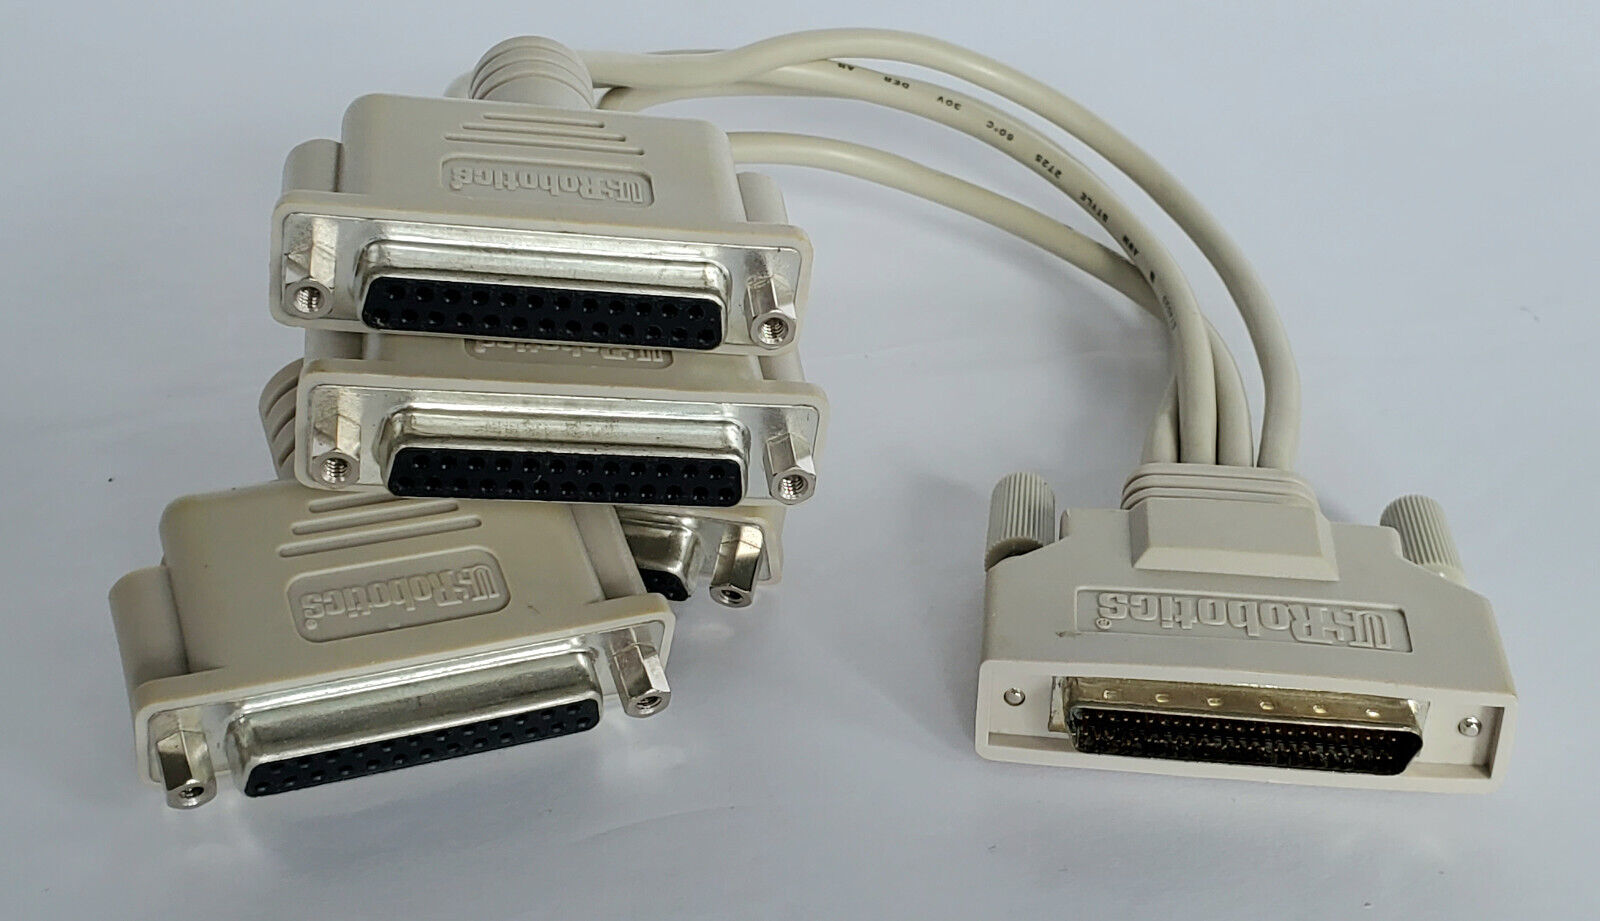 External  1 1/2ft cable/adapter SCSI 2 High Density 50-pin Male to  DB25 female